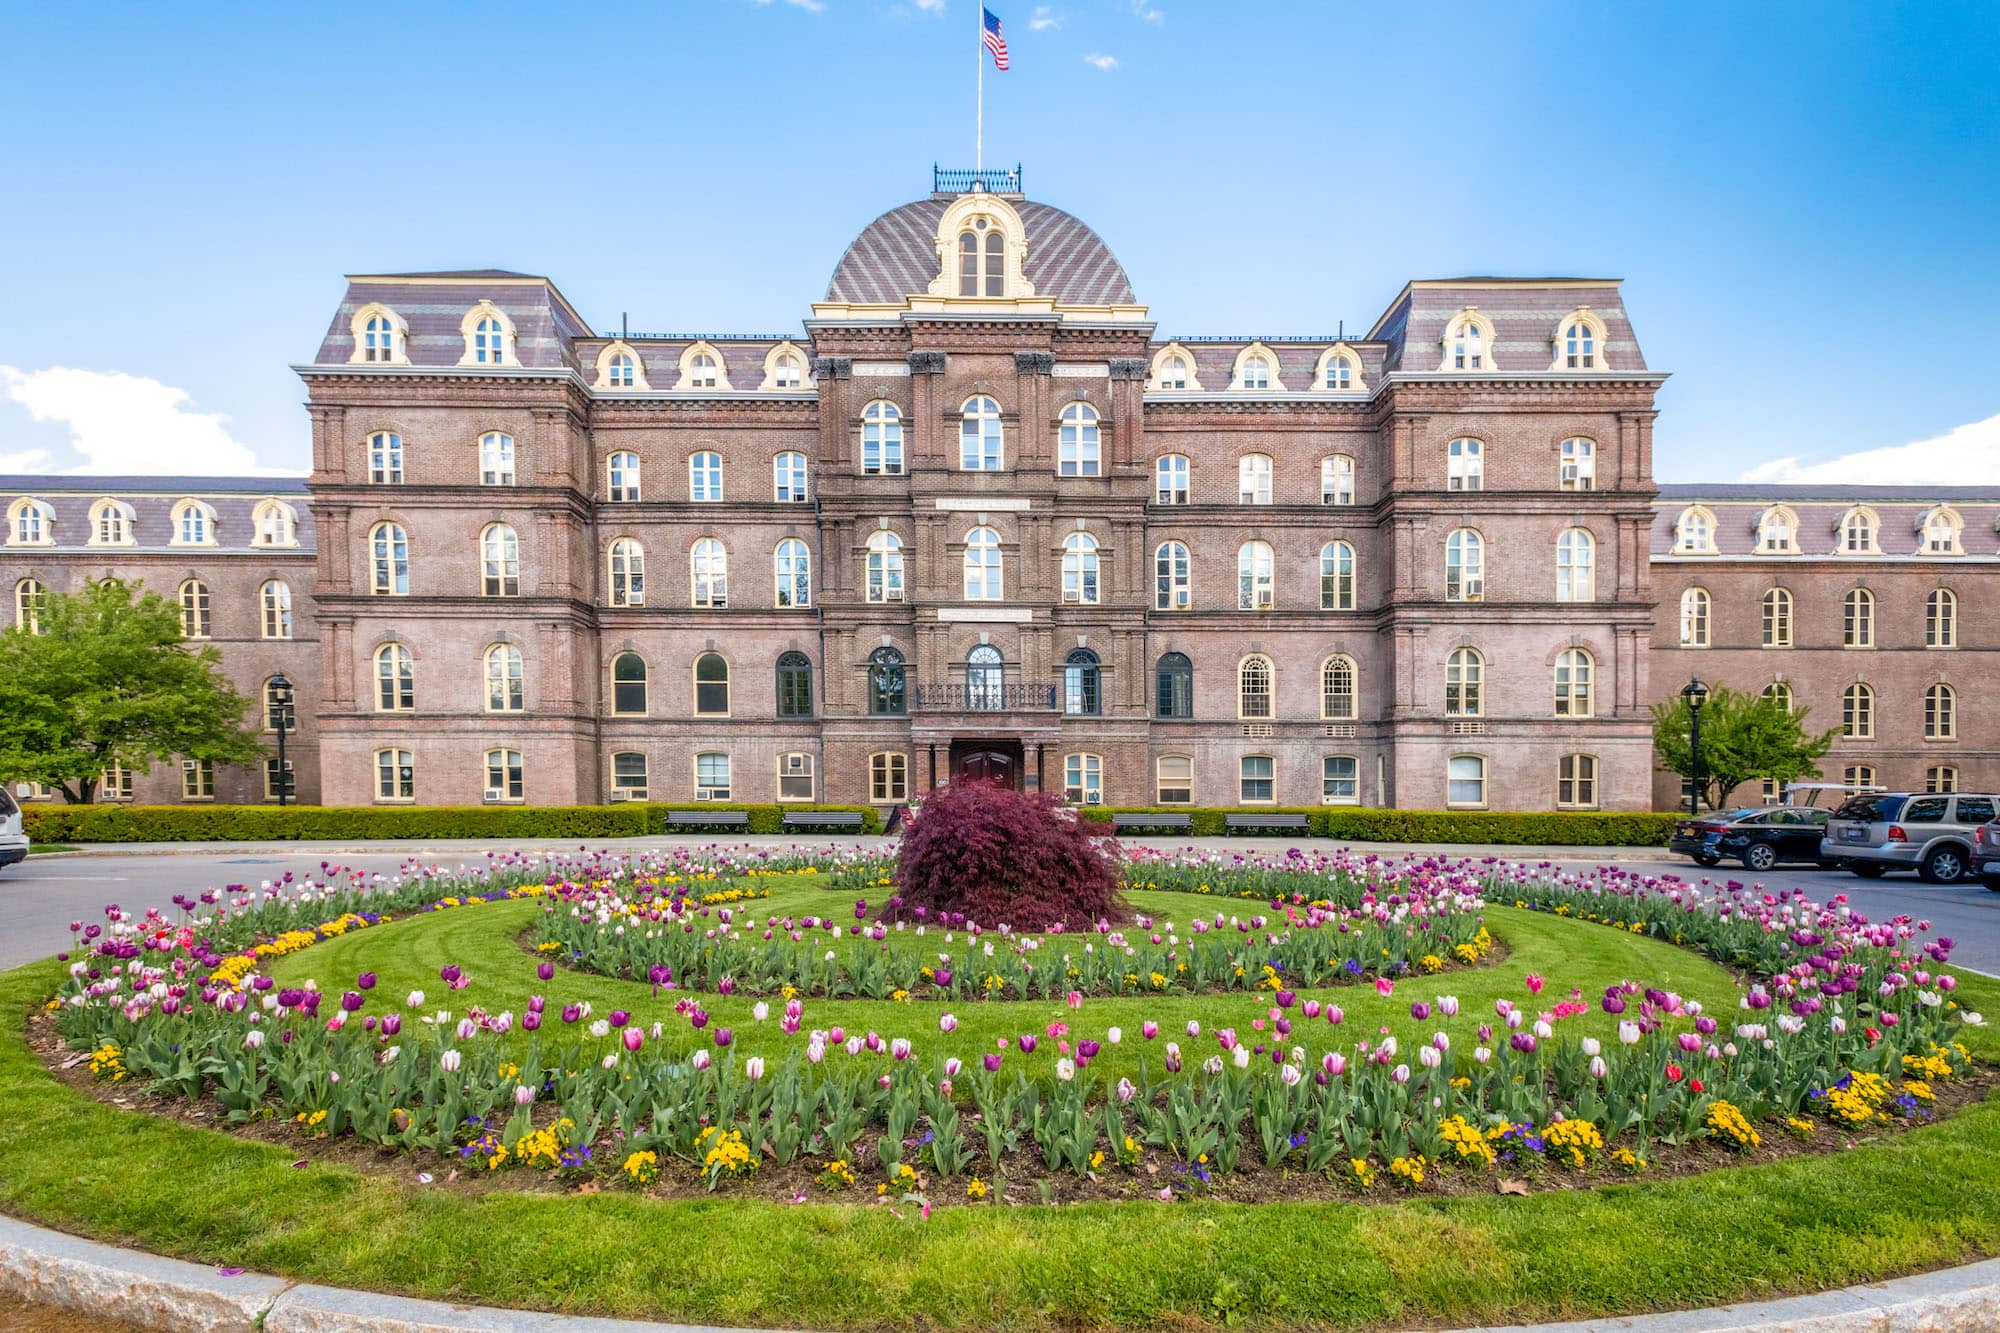 The front of Main Building on the Vassar campus, a large red brick building. In front of the building lies a circular garden area adorned with various types of colorful flowers.